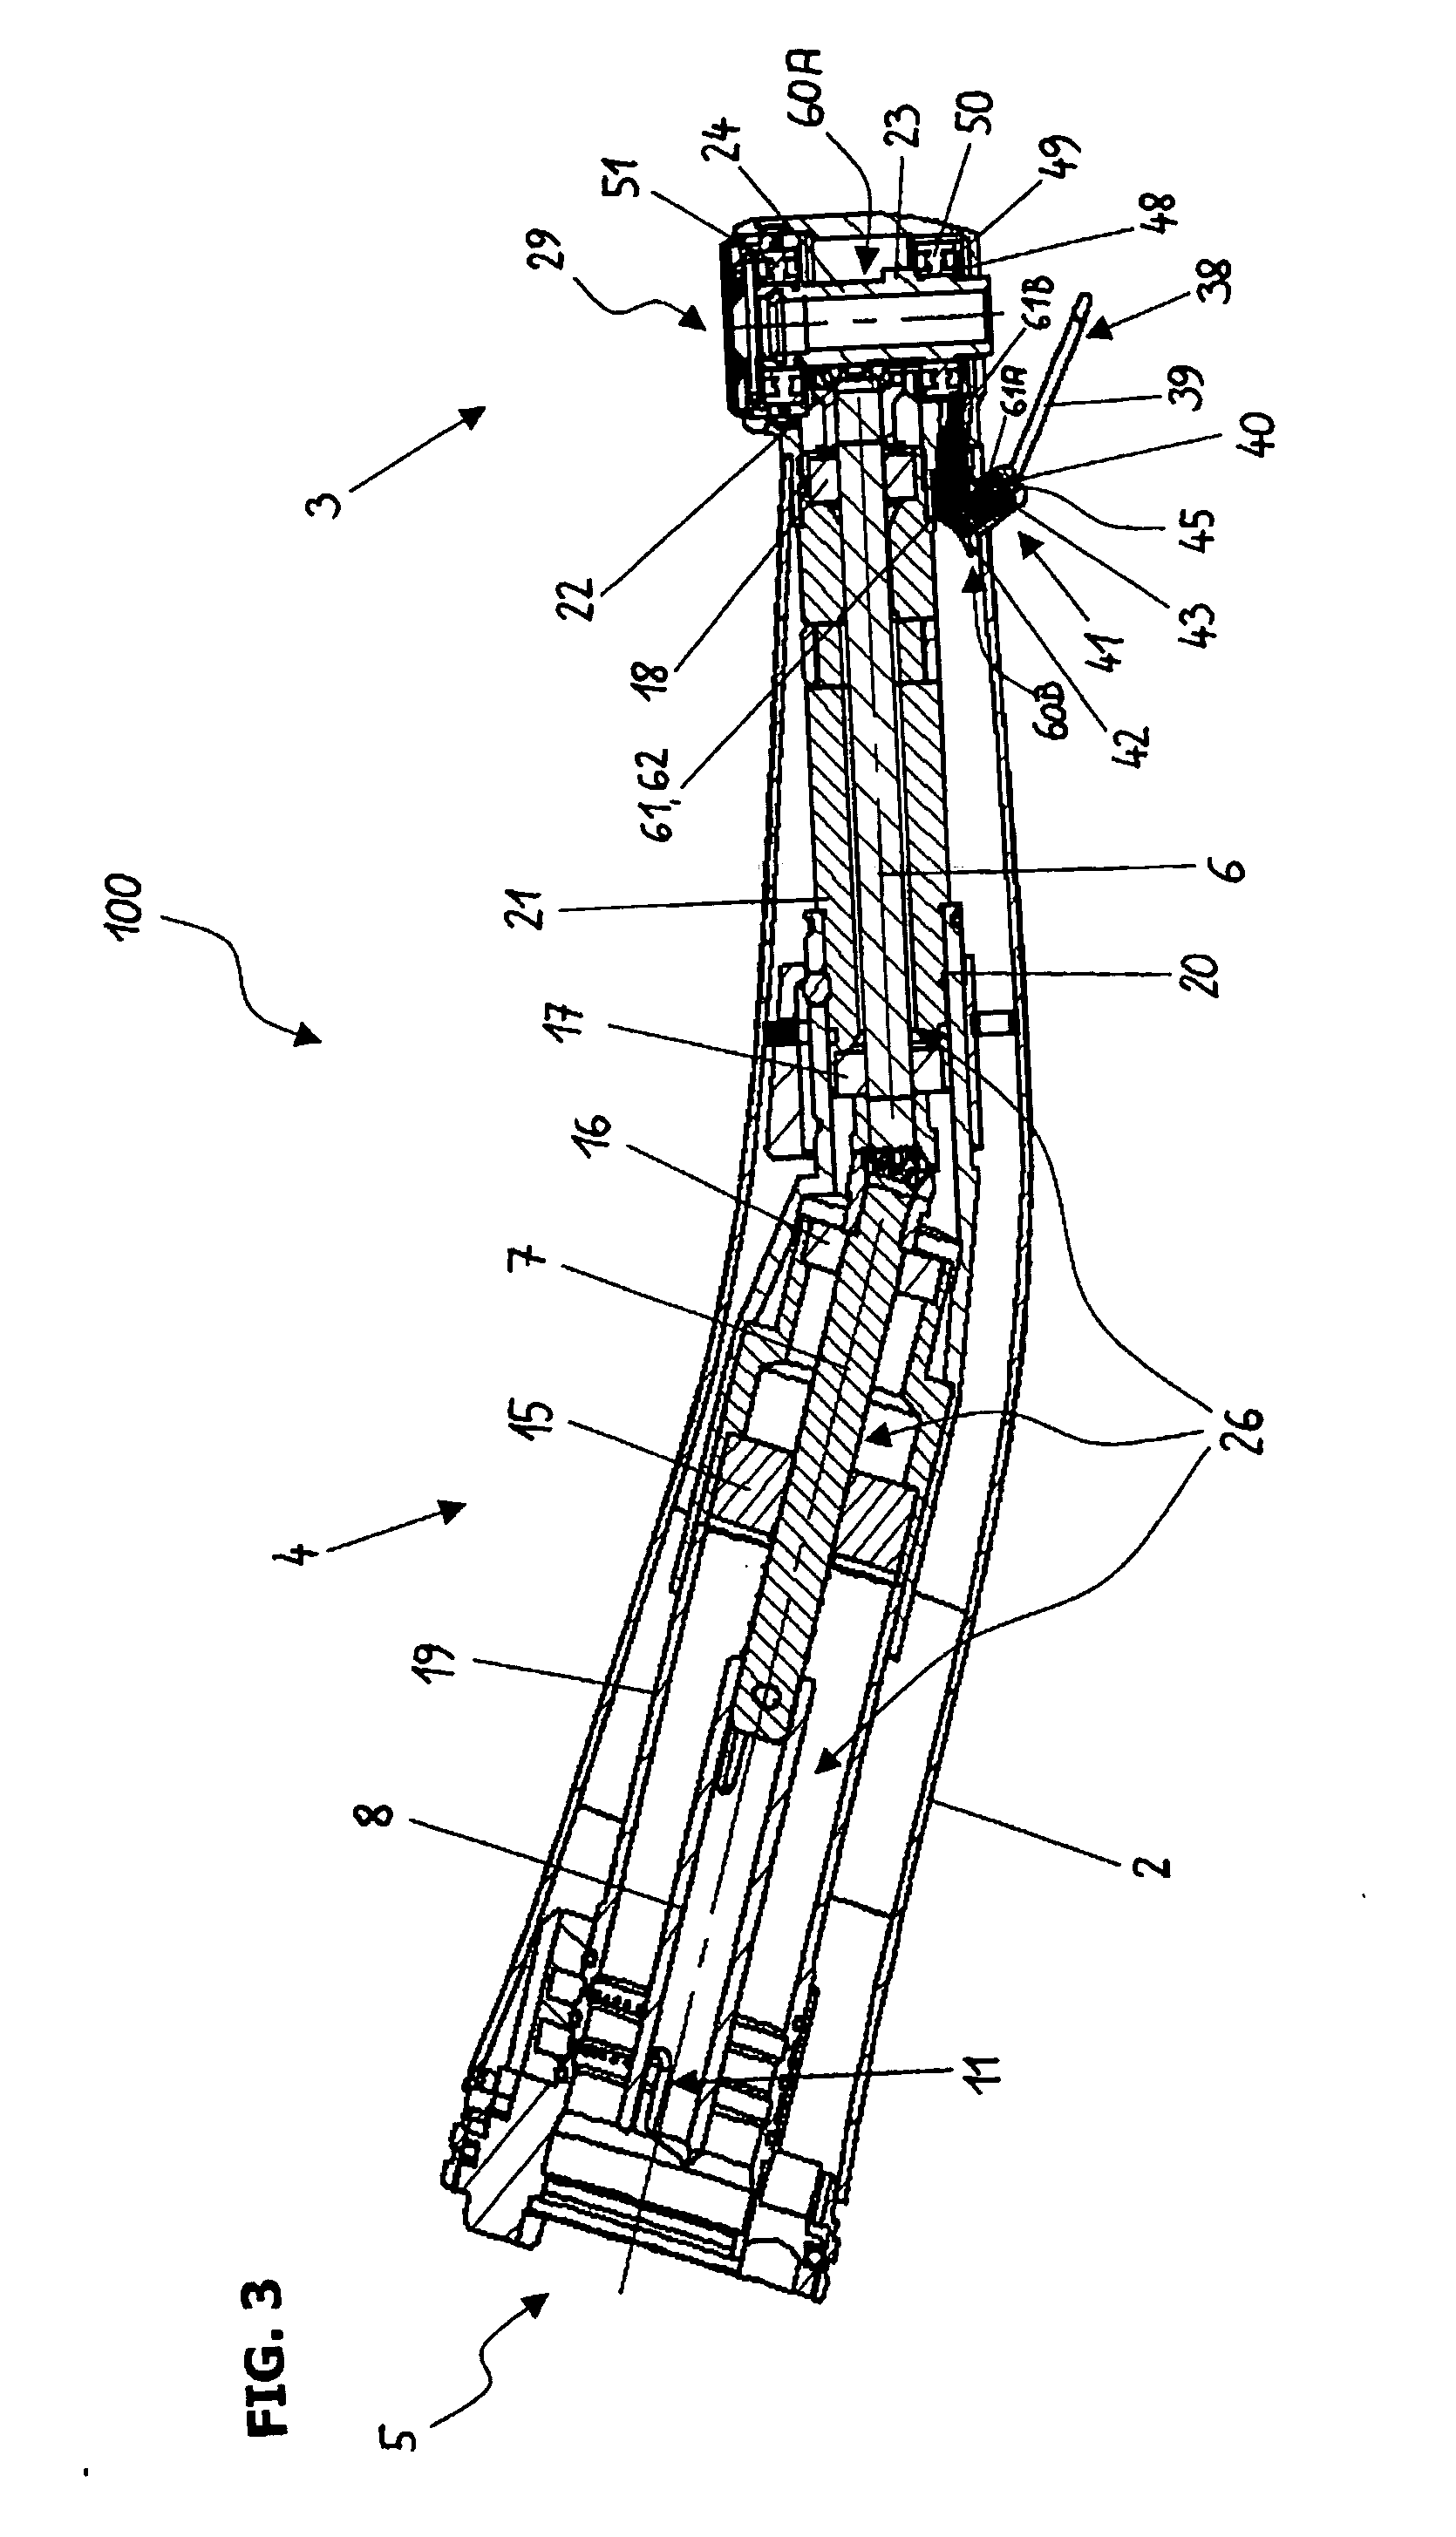 Dental handpiece with a root canal length measurement function